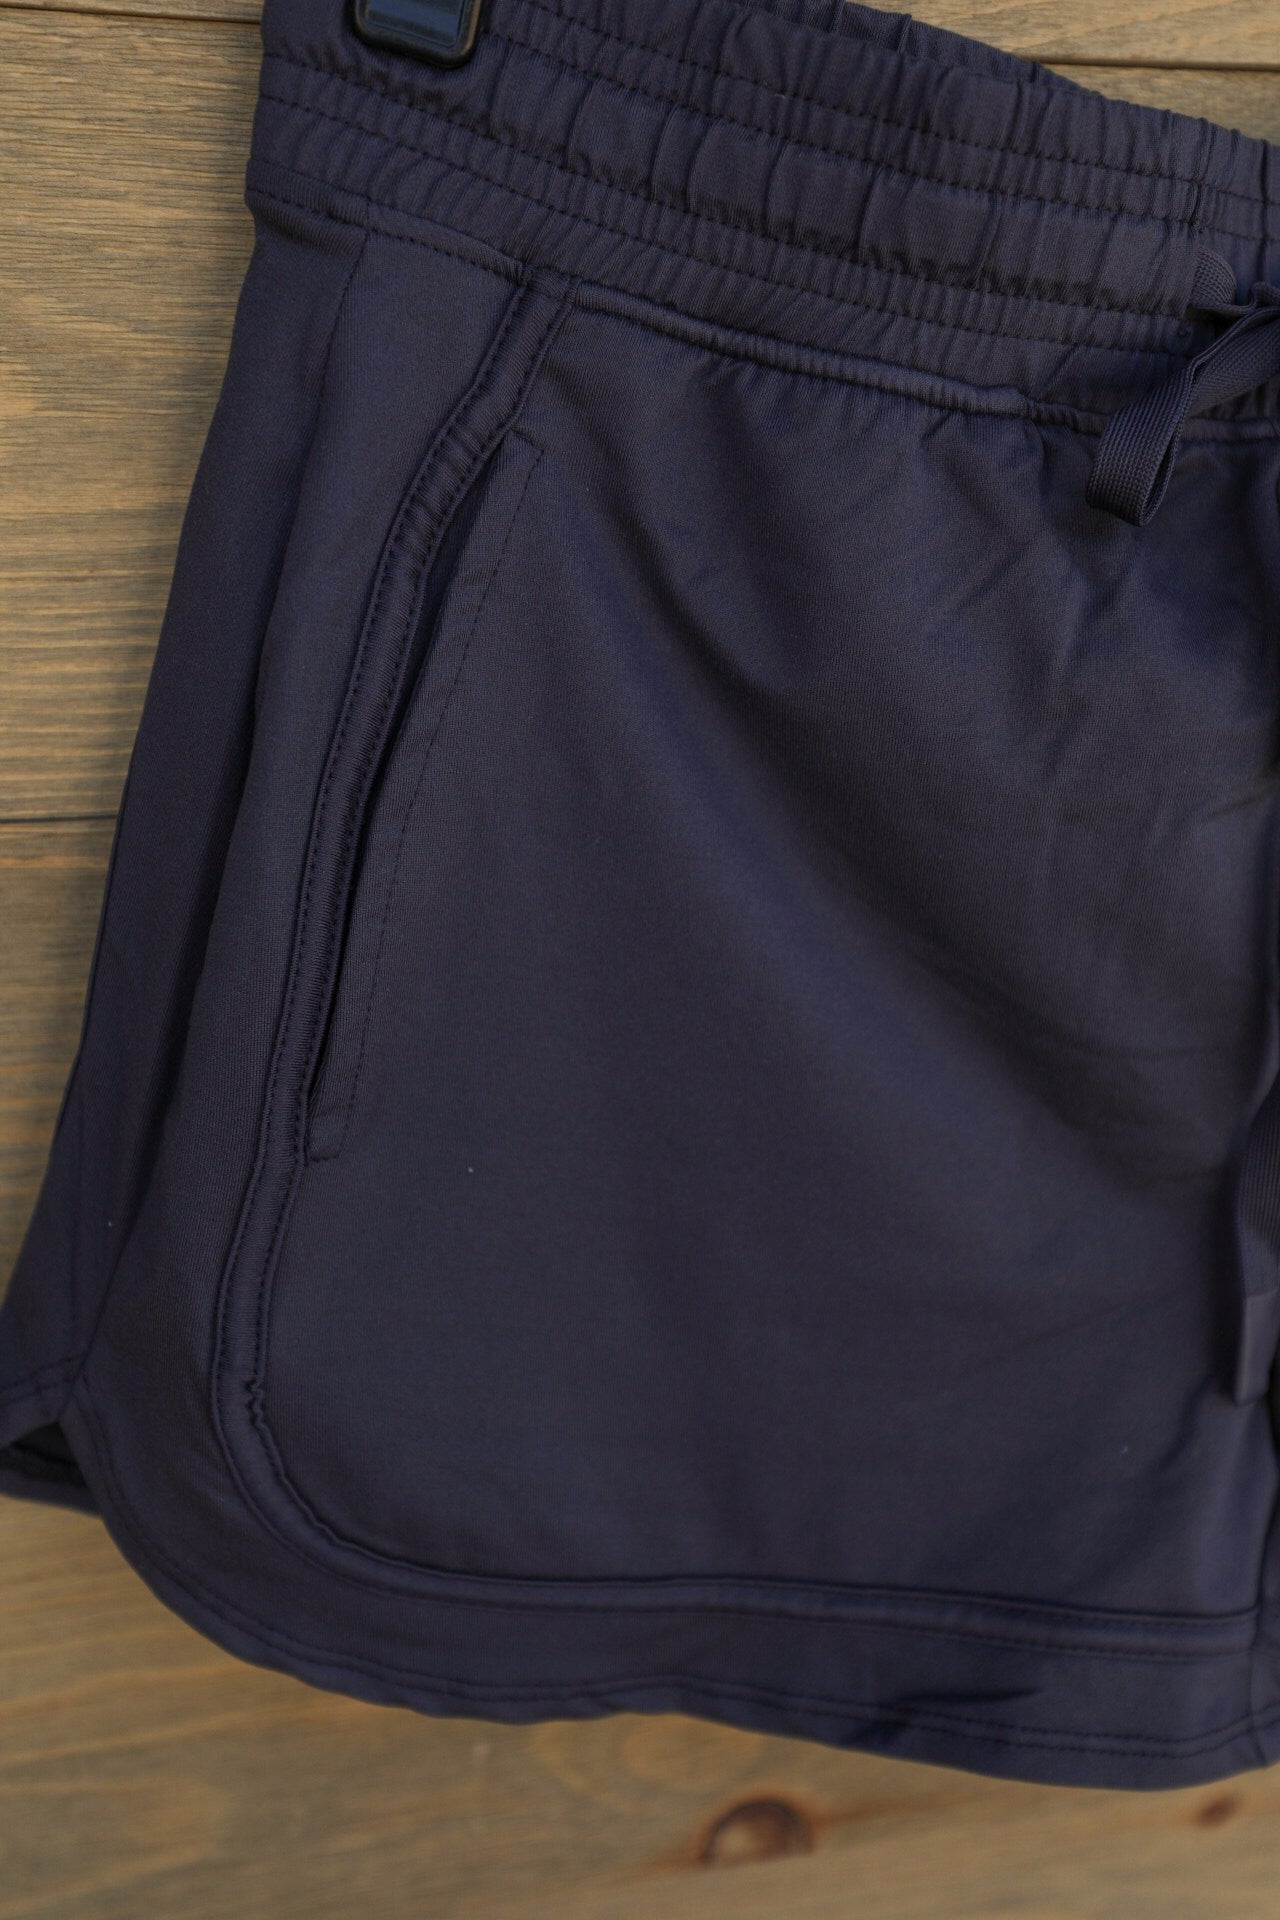 Helalia Charcoal Blue Shorts-Lounge / Activewear-Crooked Horn Company, Online Women's Fashion Boutique in San Tan Valley, Arizona 85140